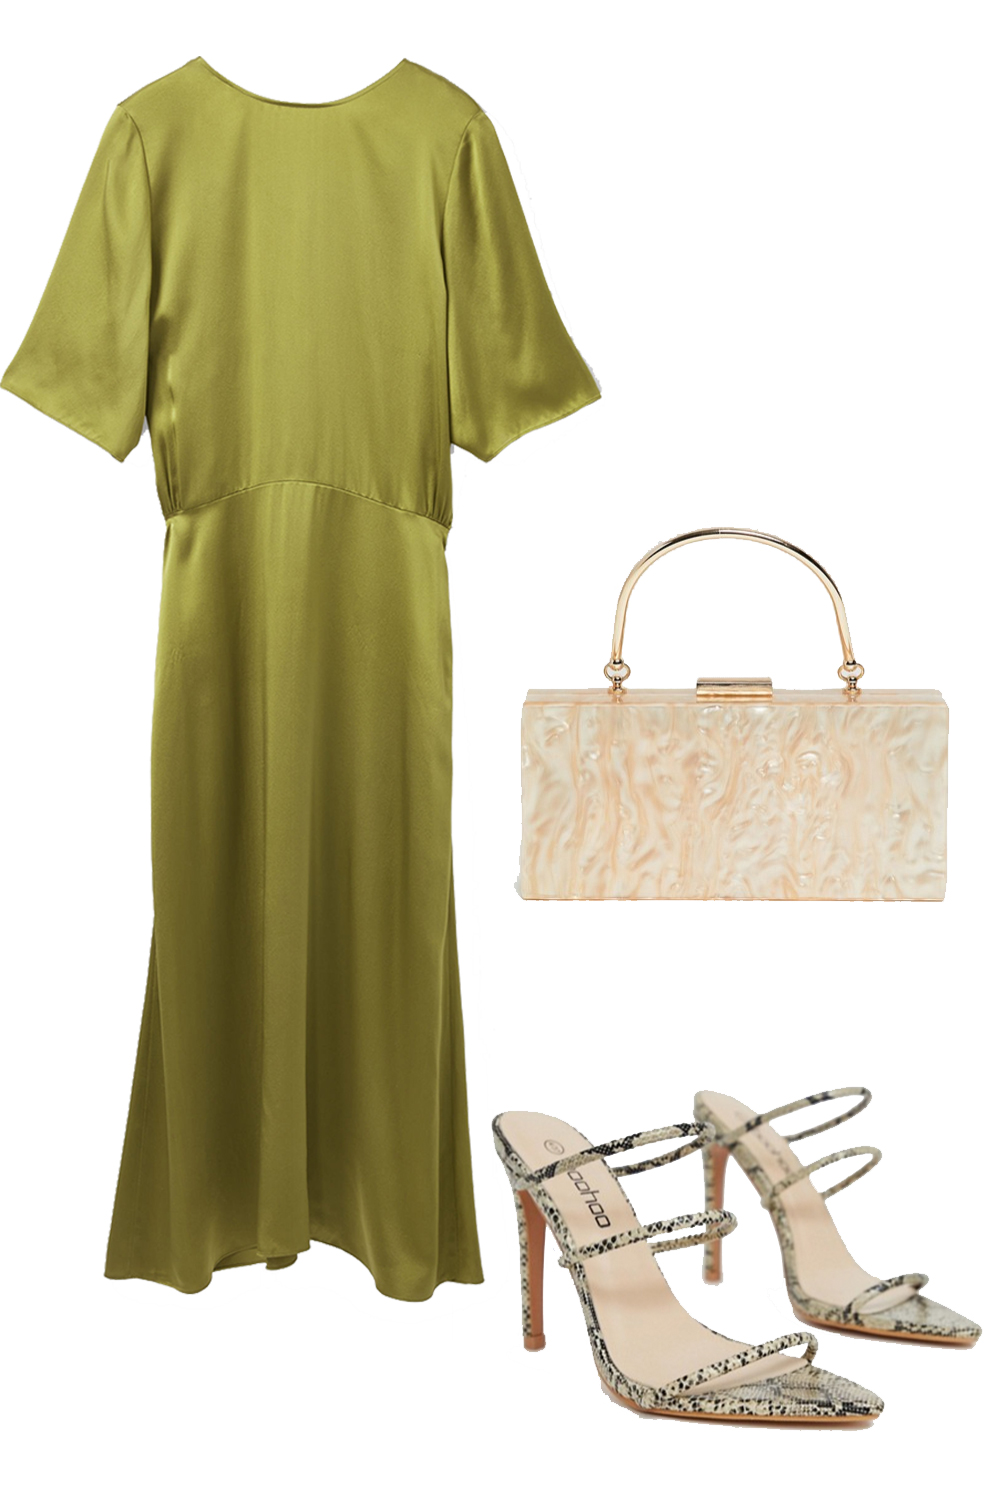 Affordable wedding guest outfits: satin midi and snake skin shoes